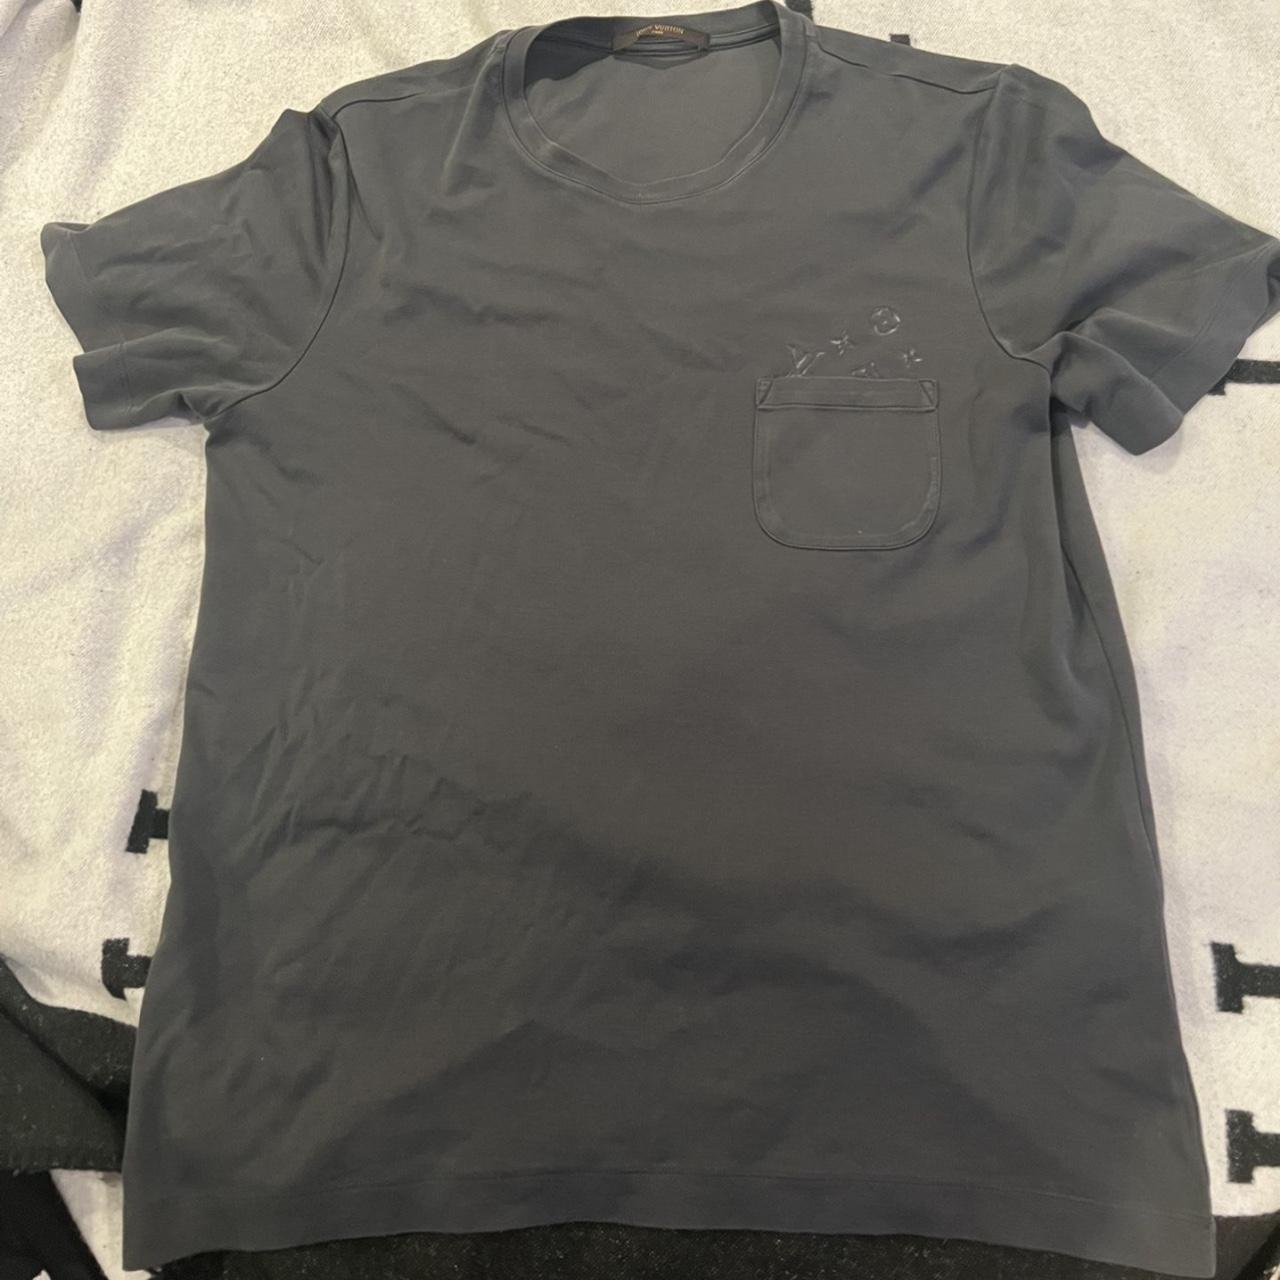 Louis Vuitton T-shirt for Men  Buy or Sell your LV T-shirts! - Vestiaire  Collective